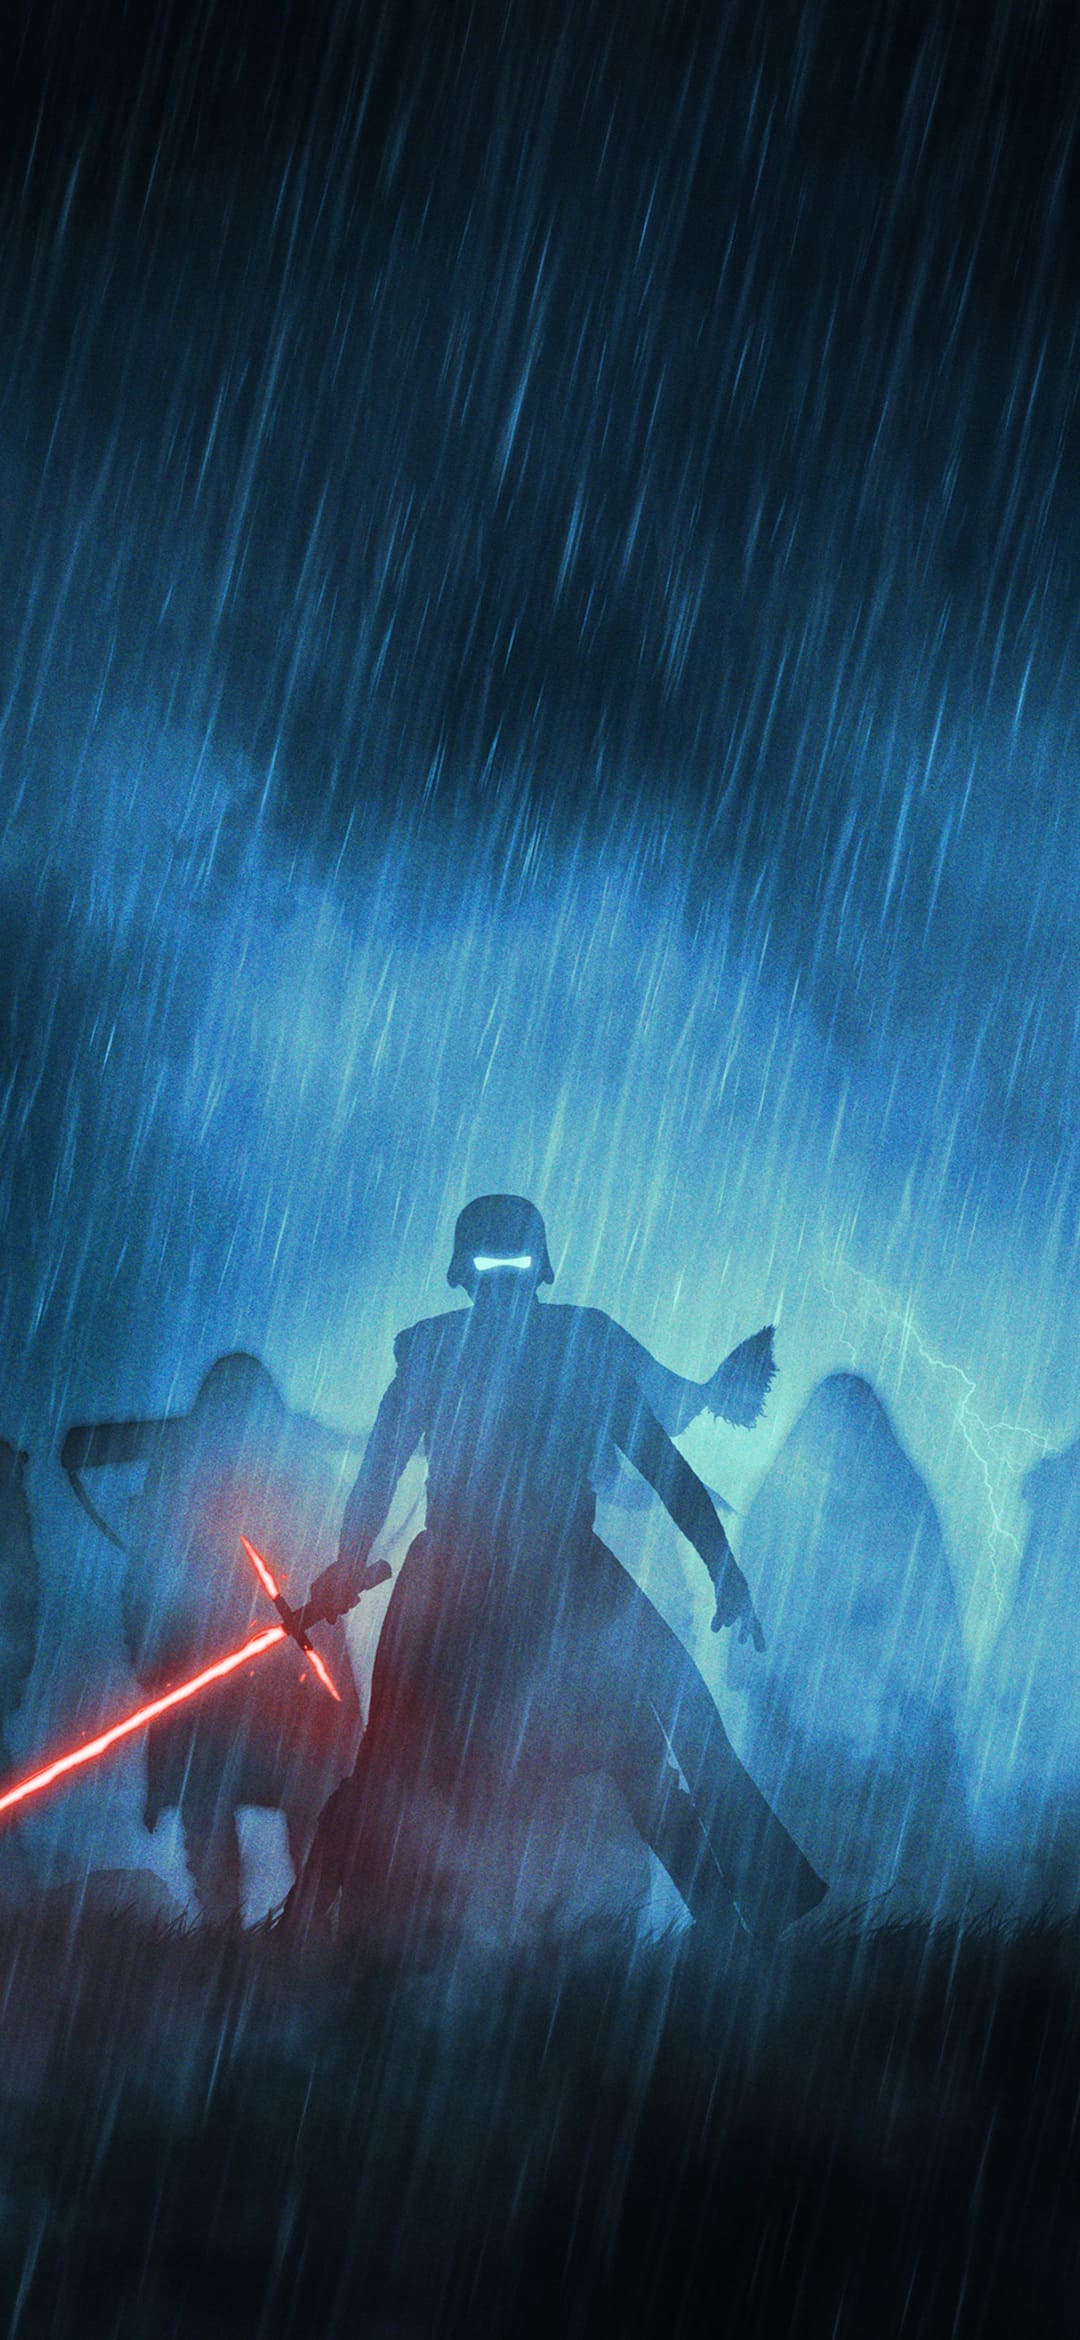 IPhone wallpaper with a scene from Star Wars: The Force Awakens - Star Wars